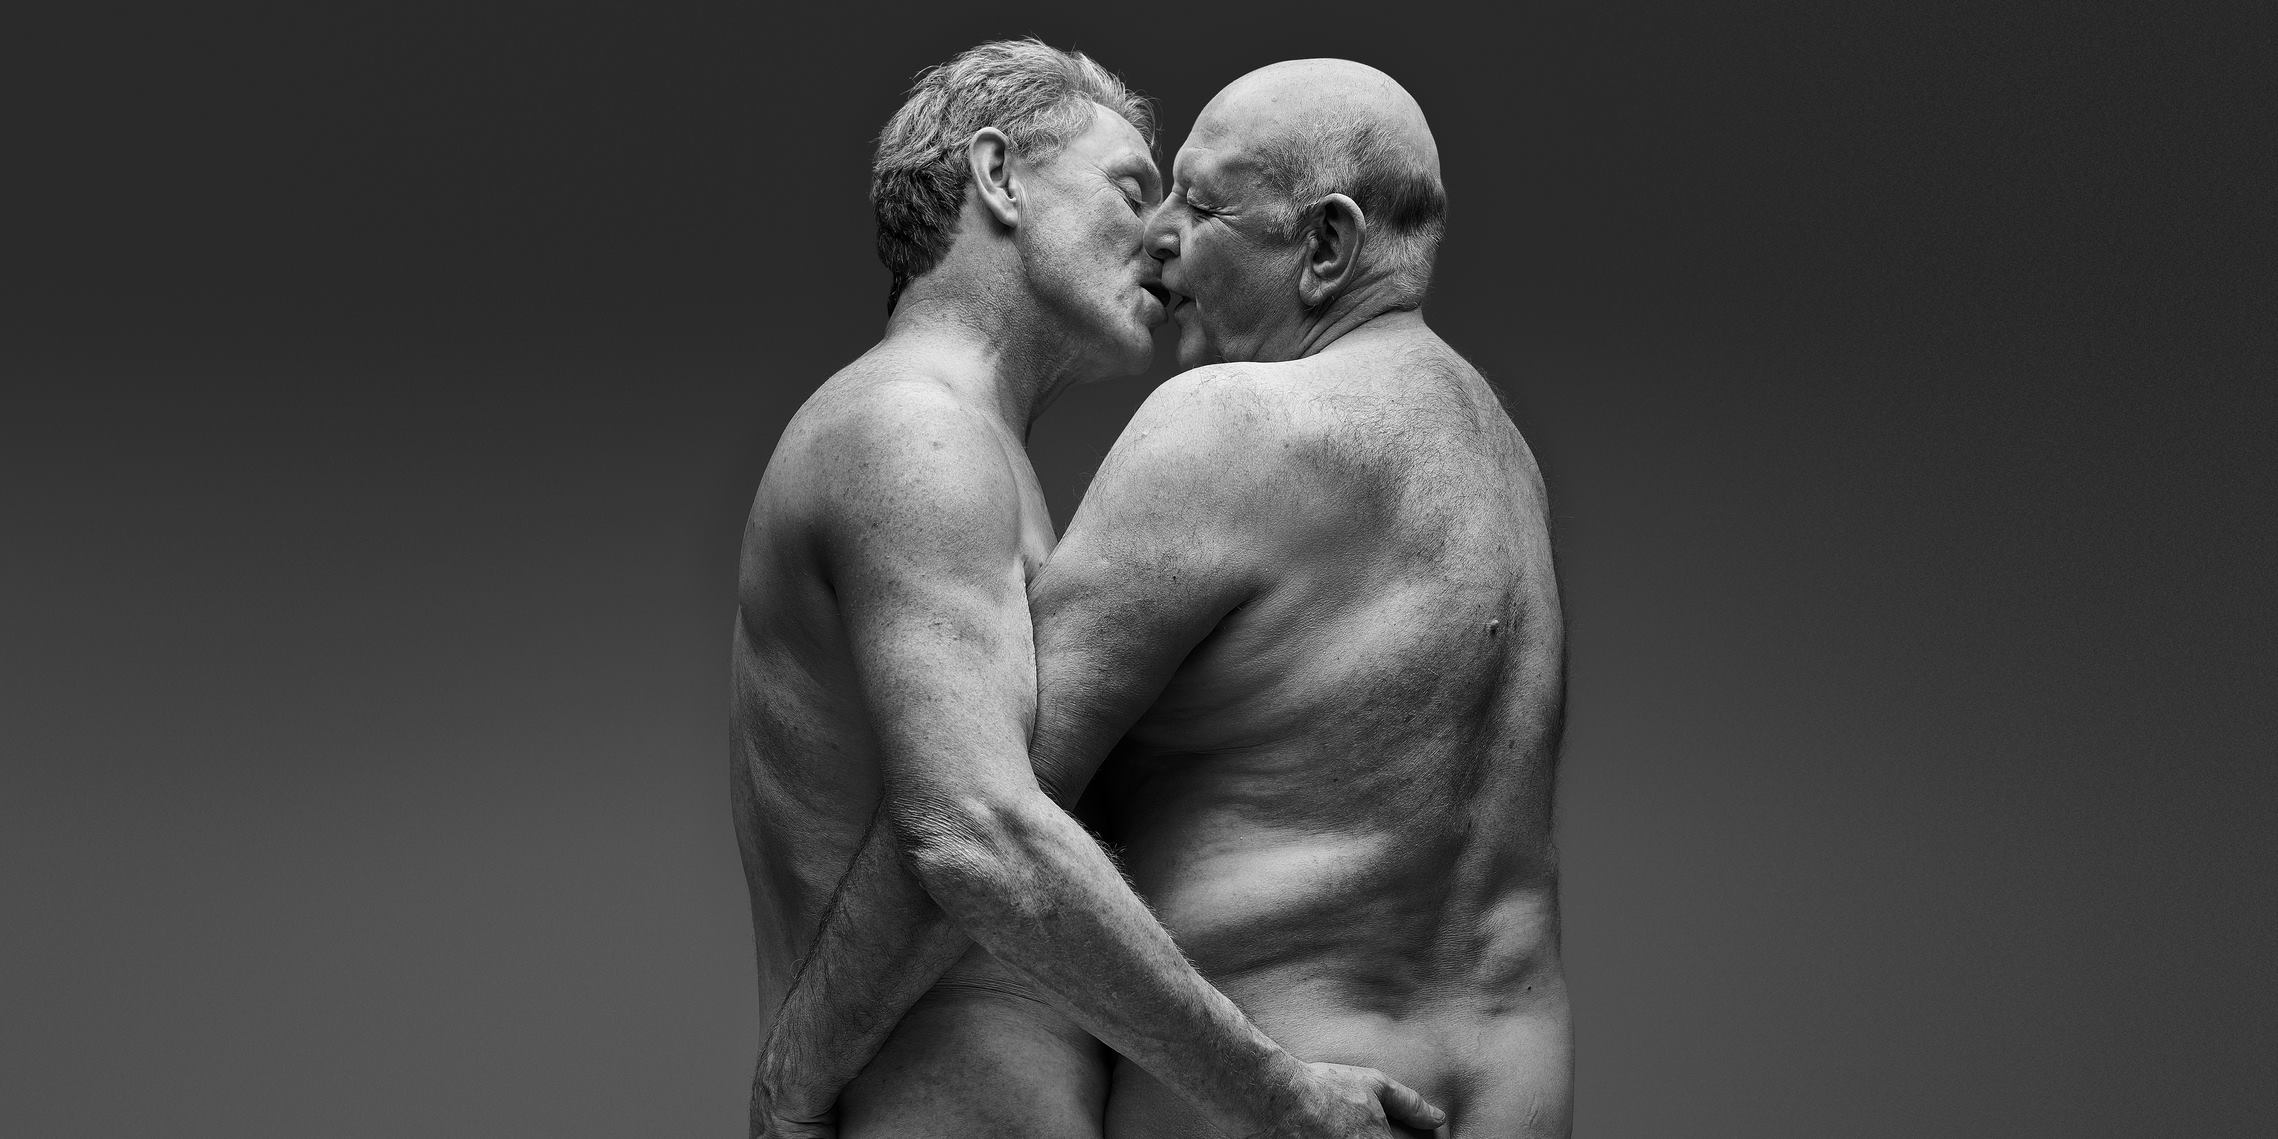 Two men embrace, their mouths are just touching. They hold their hands on each other's naked lower backs, which disappear out of frame but suggest complete nudity